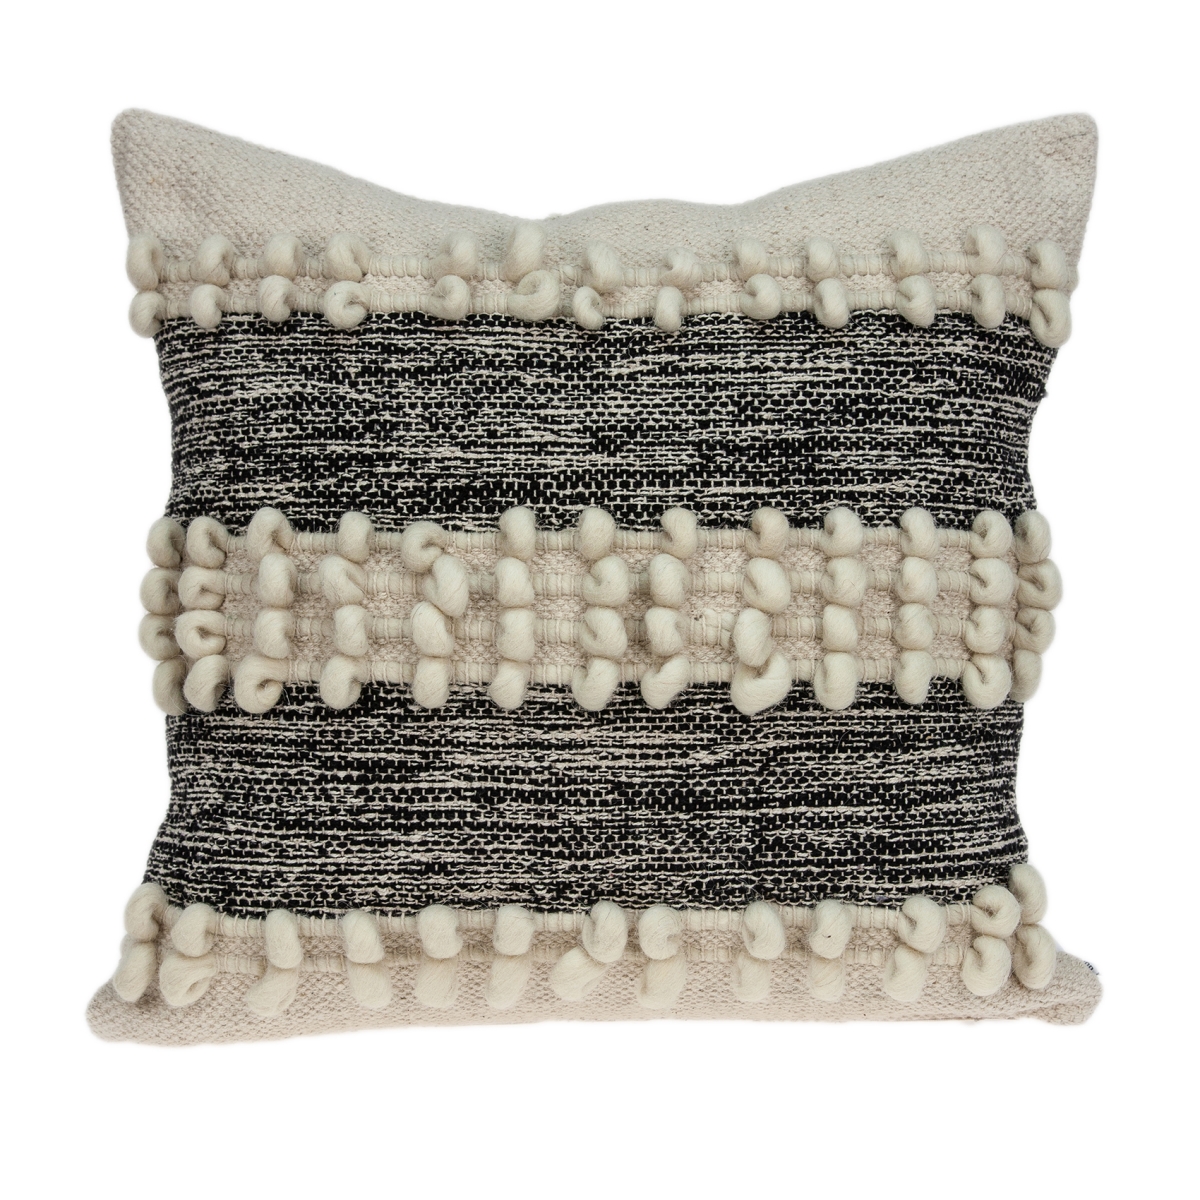 Pild11130d Harlow Beige & Black Square Bohemian Pillow Cover With Down Insert - 20 X 20 X 7 In.